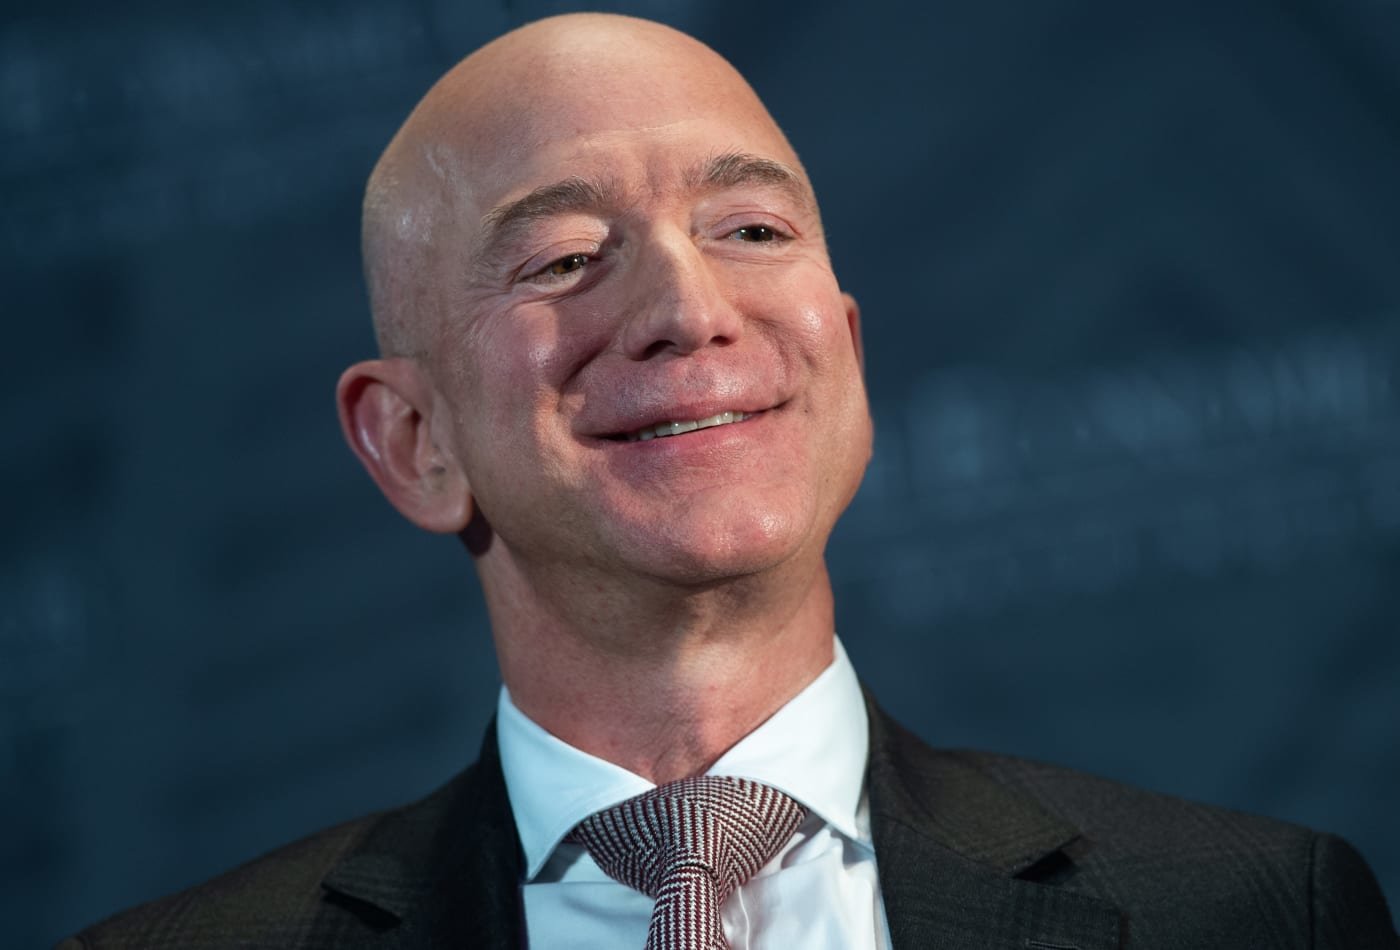 Corona-economy: Jeff Bezos Gains Record $13 Billion in a Single Day. How much did you add to your fortune today?